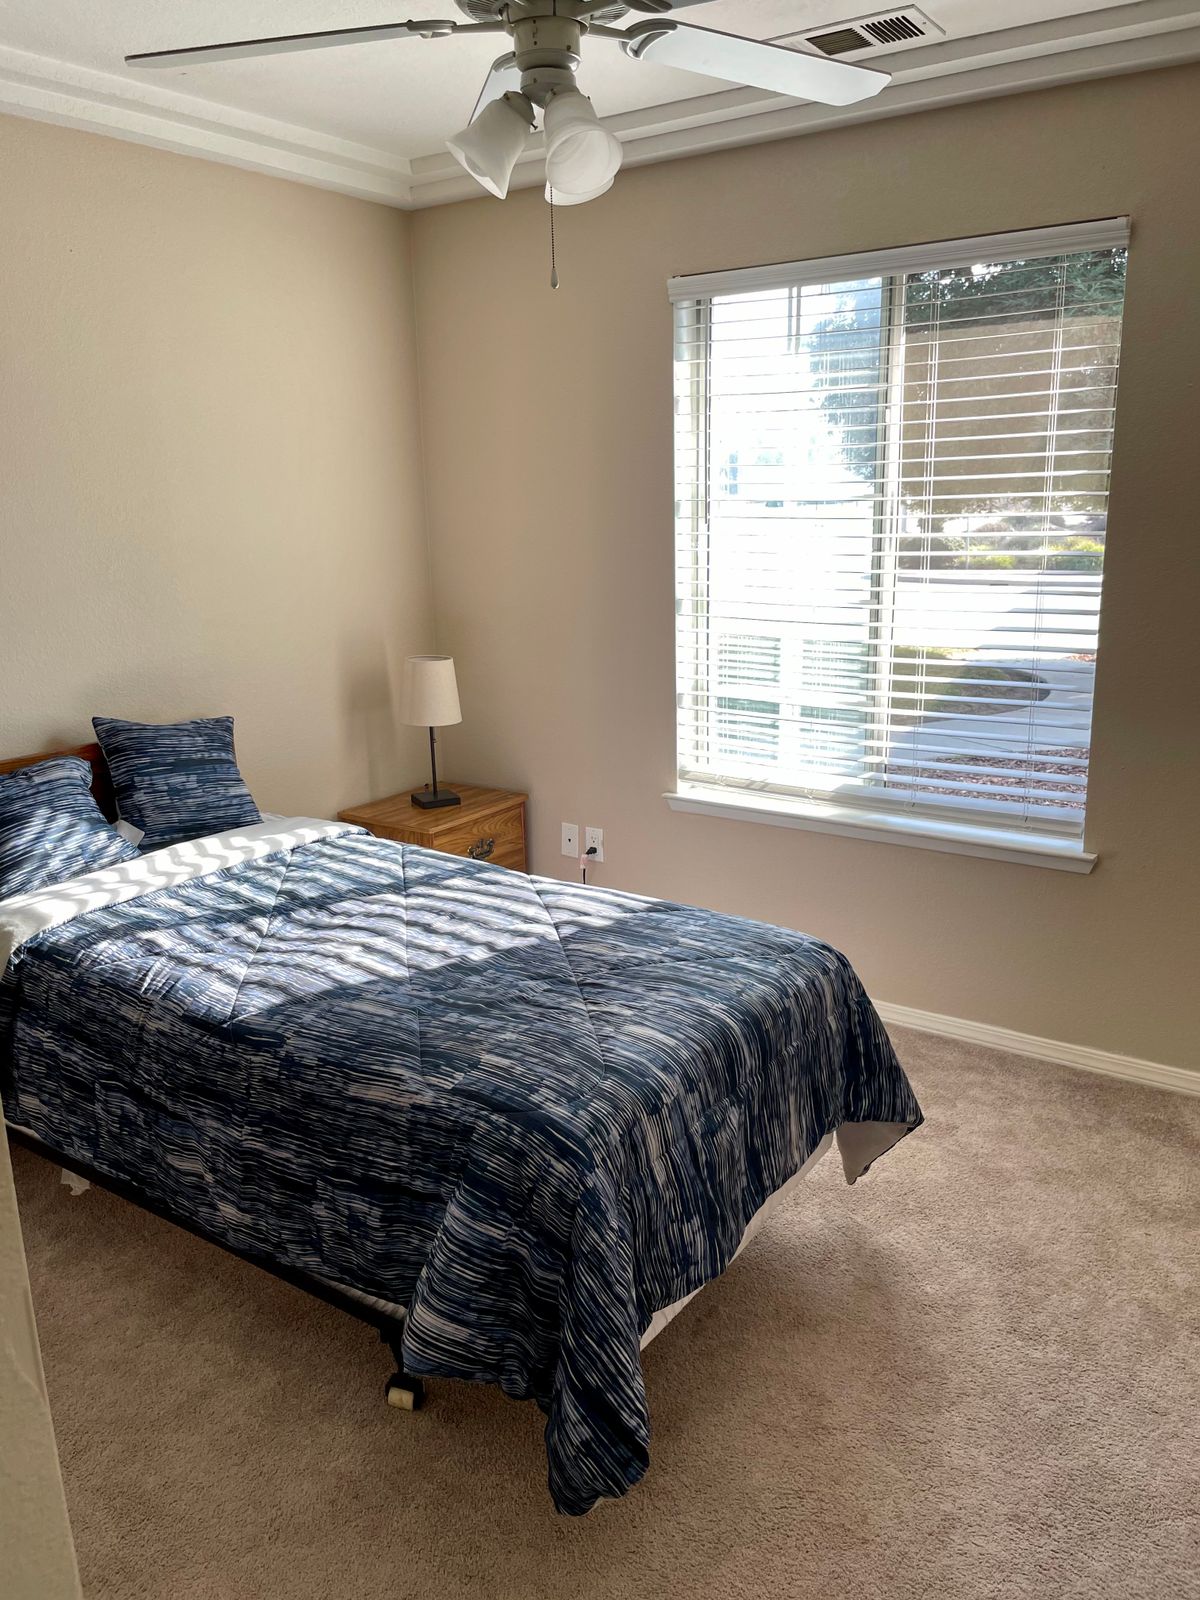 Interior view of a well-furnished bedroom at Rosewood Assisted Living with modern appliances.